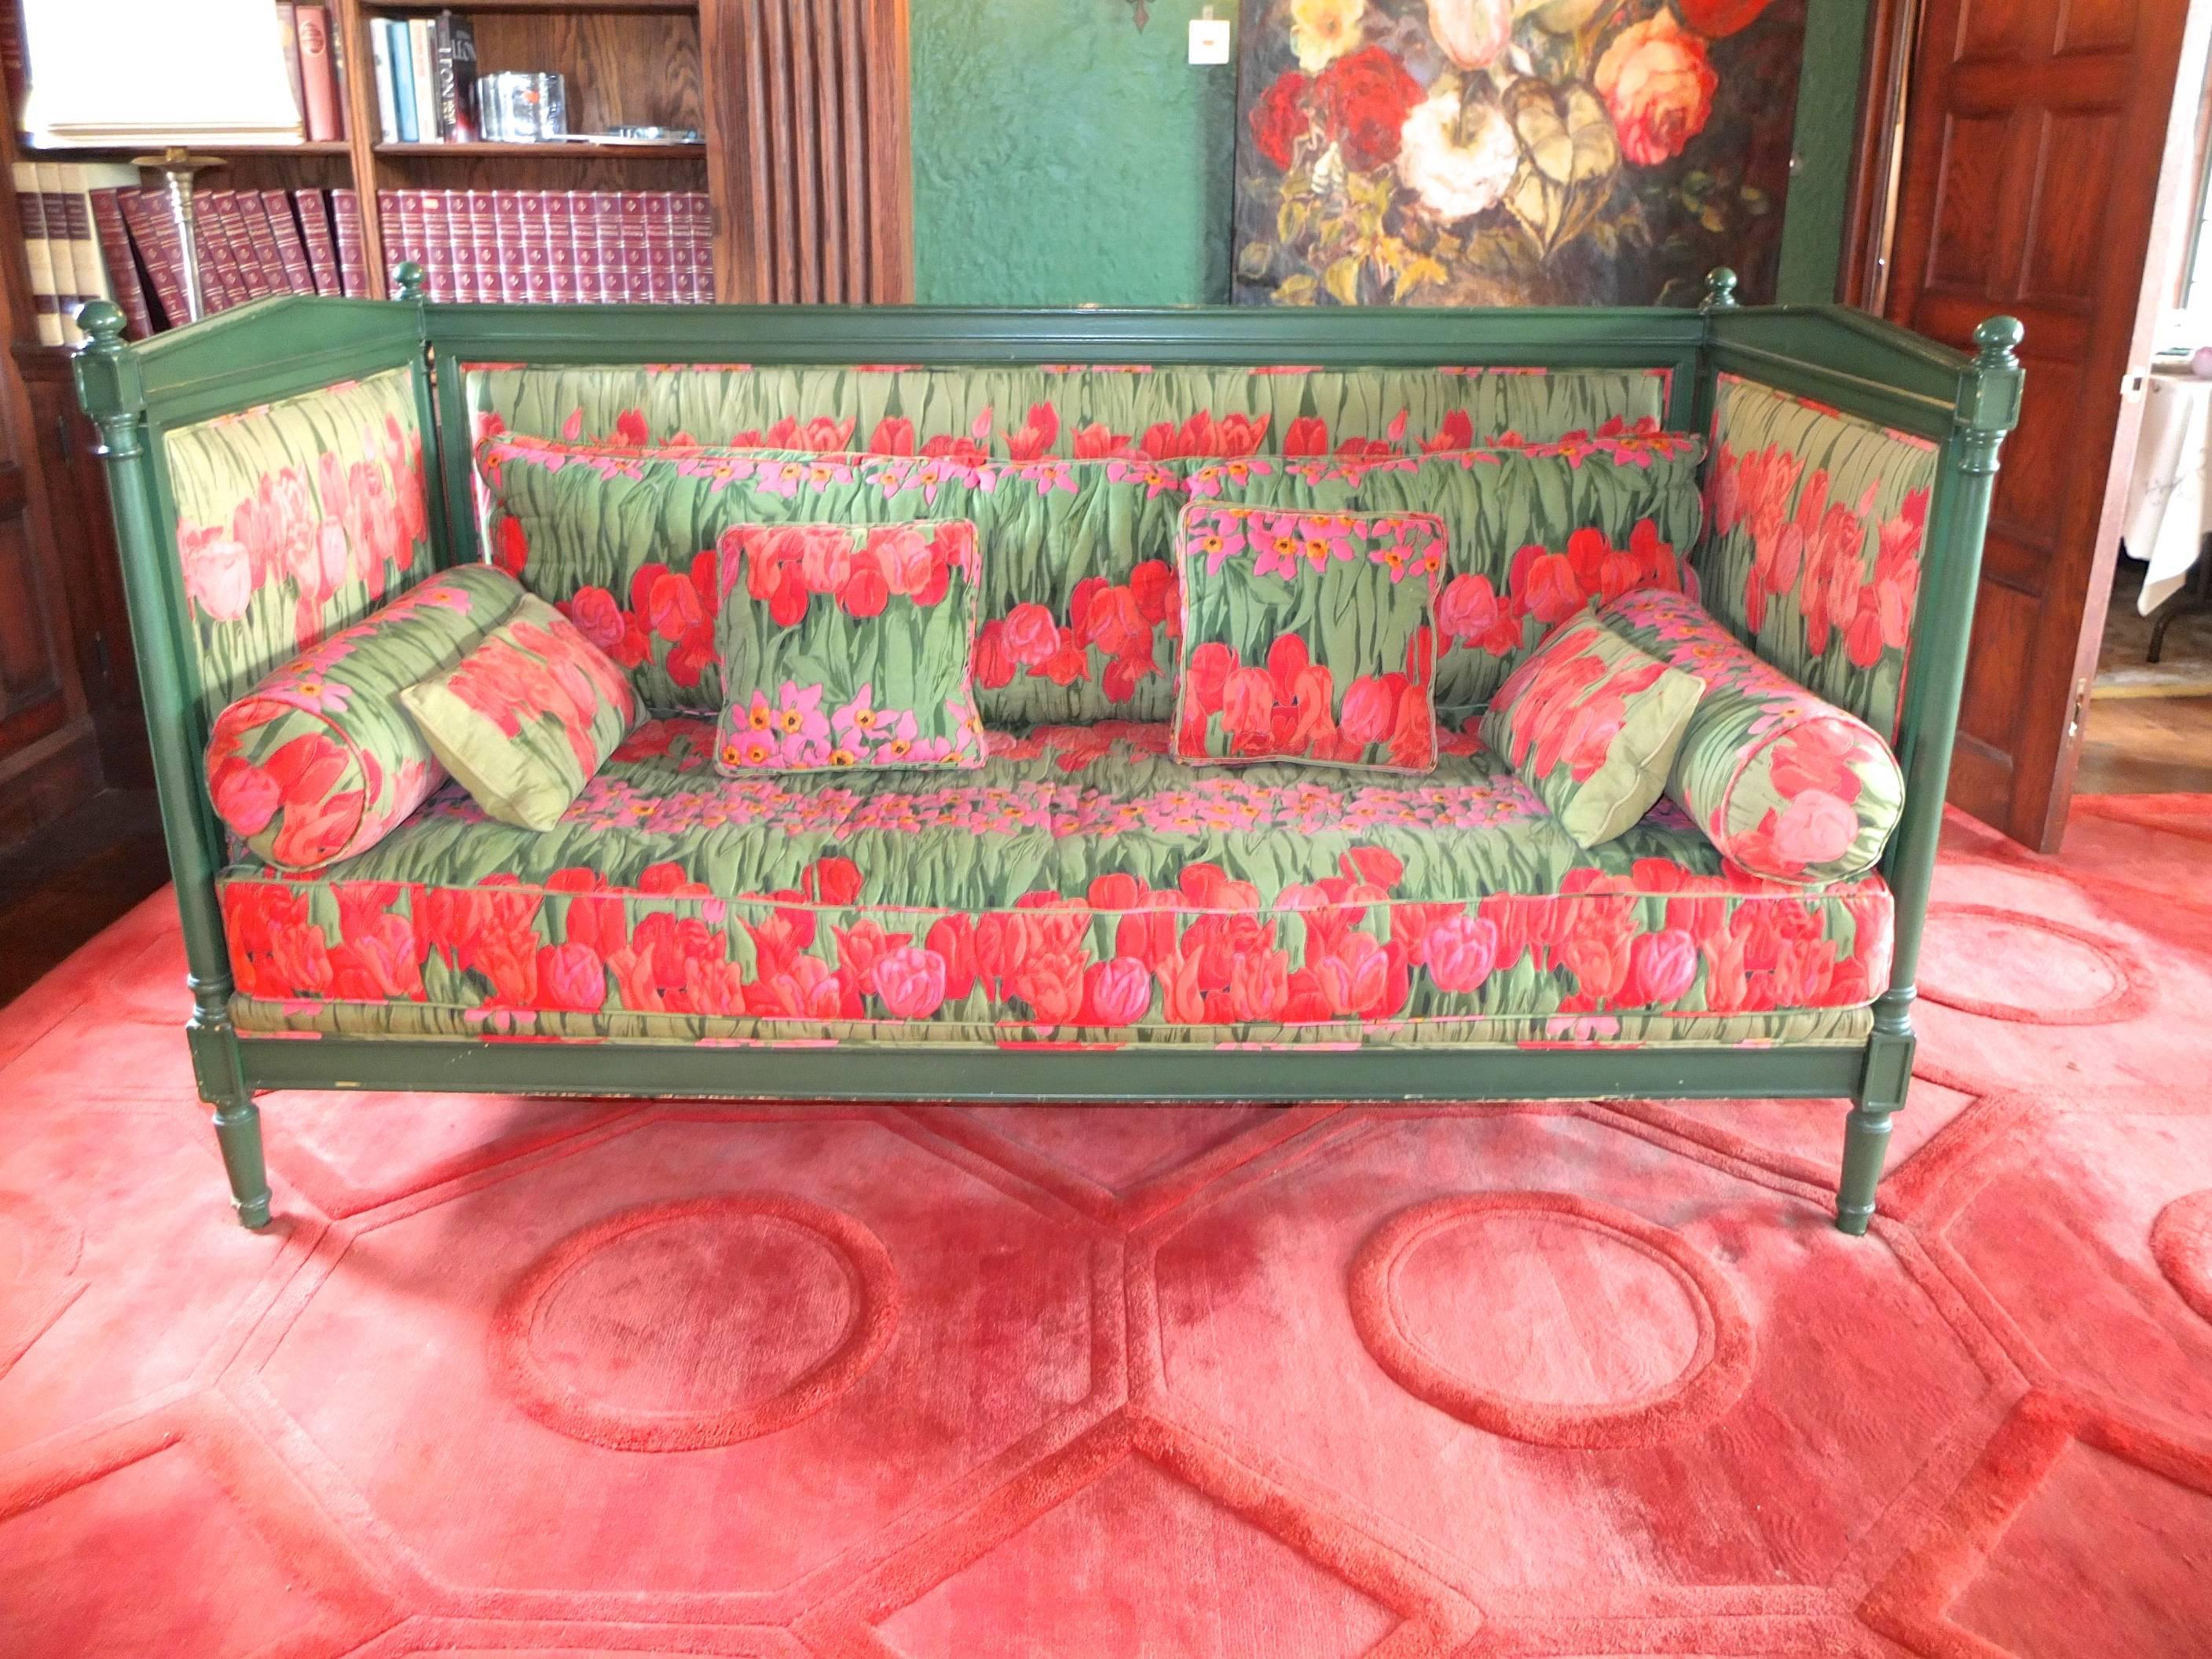 I am hoping someone will recognize this amazing fabric and then contact me with the answer because it is truly Beyond Gorgeosity. All I know is that it is a very up-market quilted fabric from 1970.

I see flaming red tulips with their green stems